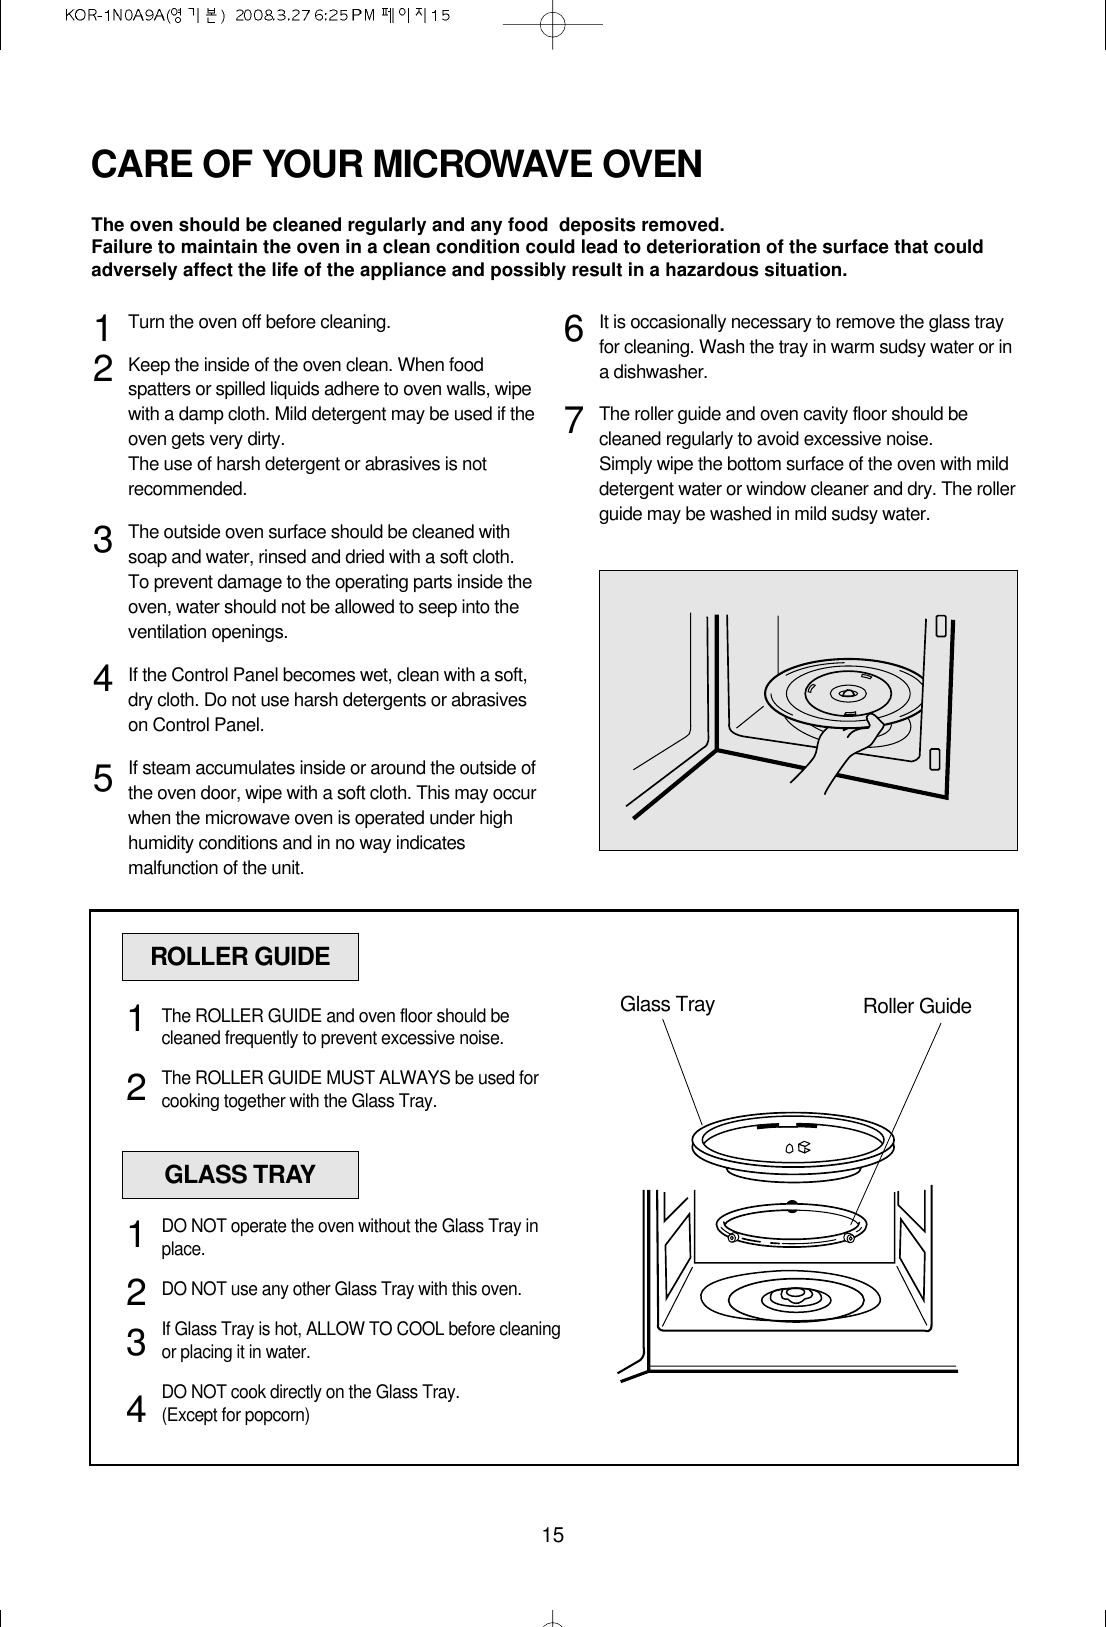 15CARE OF YOUR MICROWAVE OVENTurn the oven off before cleaning.Keep the inside of the oven clean. When foodspatters or spilled liquids adhere to oven walls, wipewith a damp cloth. Mild detergent may be used if theoven gets very dirty. The use of harsh detergent or abrasives is notrecommended.The outside oven surface should be cleaned withsoap and water, rinsed and dried with a soft cloth.To prevent damage to the operating parts inside theoven, water should not be allowed to seep into theventilation openings.If the Control Panel becomes wet, clean with a soft,dry cloth. Do not use harsh detergents or abrasiveson Control Panel.If steam accumulates inside or around the outside ofthe oven door, wipe with a soft cloth. This may occurwhen the microwave oven is operated under highhumidity conditions and in no way indicatesmalfunction of the unit.It is occasionally necessary to remove the glass trayfor cleaning. Wash the tray in warm sudsy water or ina dishwasher.The roller guide and oven cavity floor should becleaned regularly to avoid excessive noise. Simply wipe the bottom surface of the oven with milddetergent water or window cleaner and dry. The rollerguide may be washed in mild sudsy water.1234567ROLLER GUIDEGlass Tray Roller GuideThe ROLLER GUIDE and oven floor should becleaned frequently to prevent excessive noise.The ROLLER GUIDE MUST ALWAYS be used forcooking together with the Glass Tray.12GLASS TRAYDO NOT operate the oven without the Glass Tray inplace.DO NOT use any other Glass Tray with this oven.If Glass Tray is hot, ALLOW TO COOL before cleaningor placing it in water.DO NOT cook directly on the Glass Tray.(Except for popcorn)1234The oven should be cleaned regularly and any food  deposits removed.Failure to maintain the oven in a clean condition could lead to deterioration of the surface that couldadversely affect the life of the appliance and possibly result in a hazardous situation.